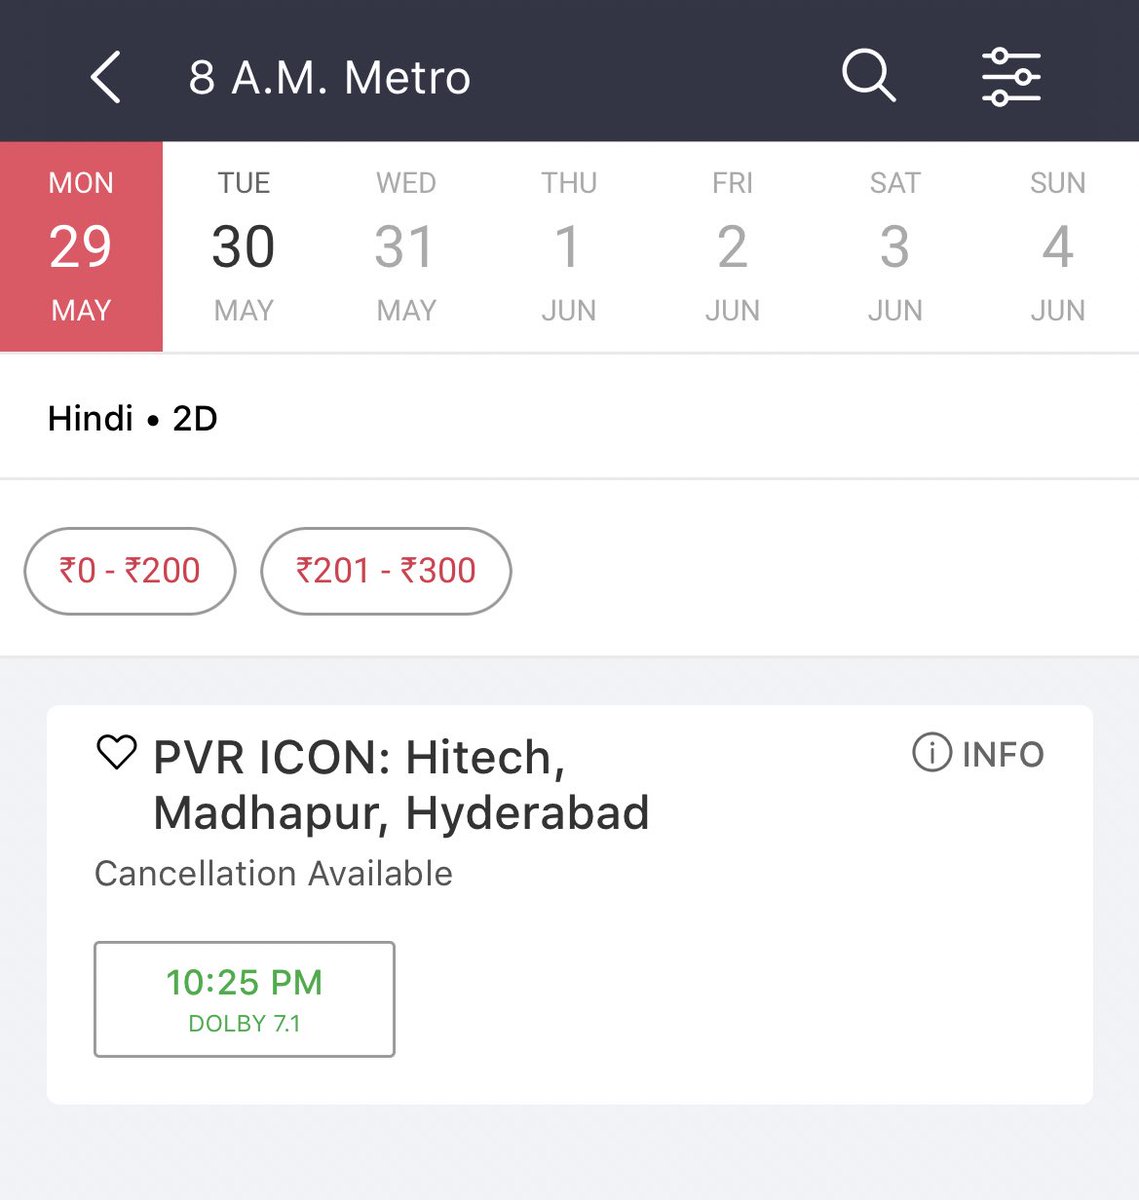 There’s one more show added in PVR Icon Madhapur, Hyderabad . Please join us and enjoy our movie. Me and director Raj sir will be there, would love to meet you all 🙌🏼
Ps: subtitles are there!
#8AMMetro @MalleshamMovie @gulshandevaiah @SaiyamiKher